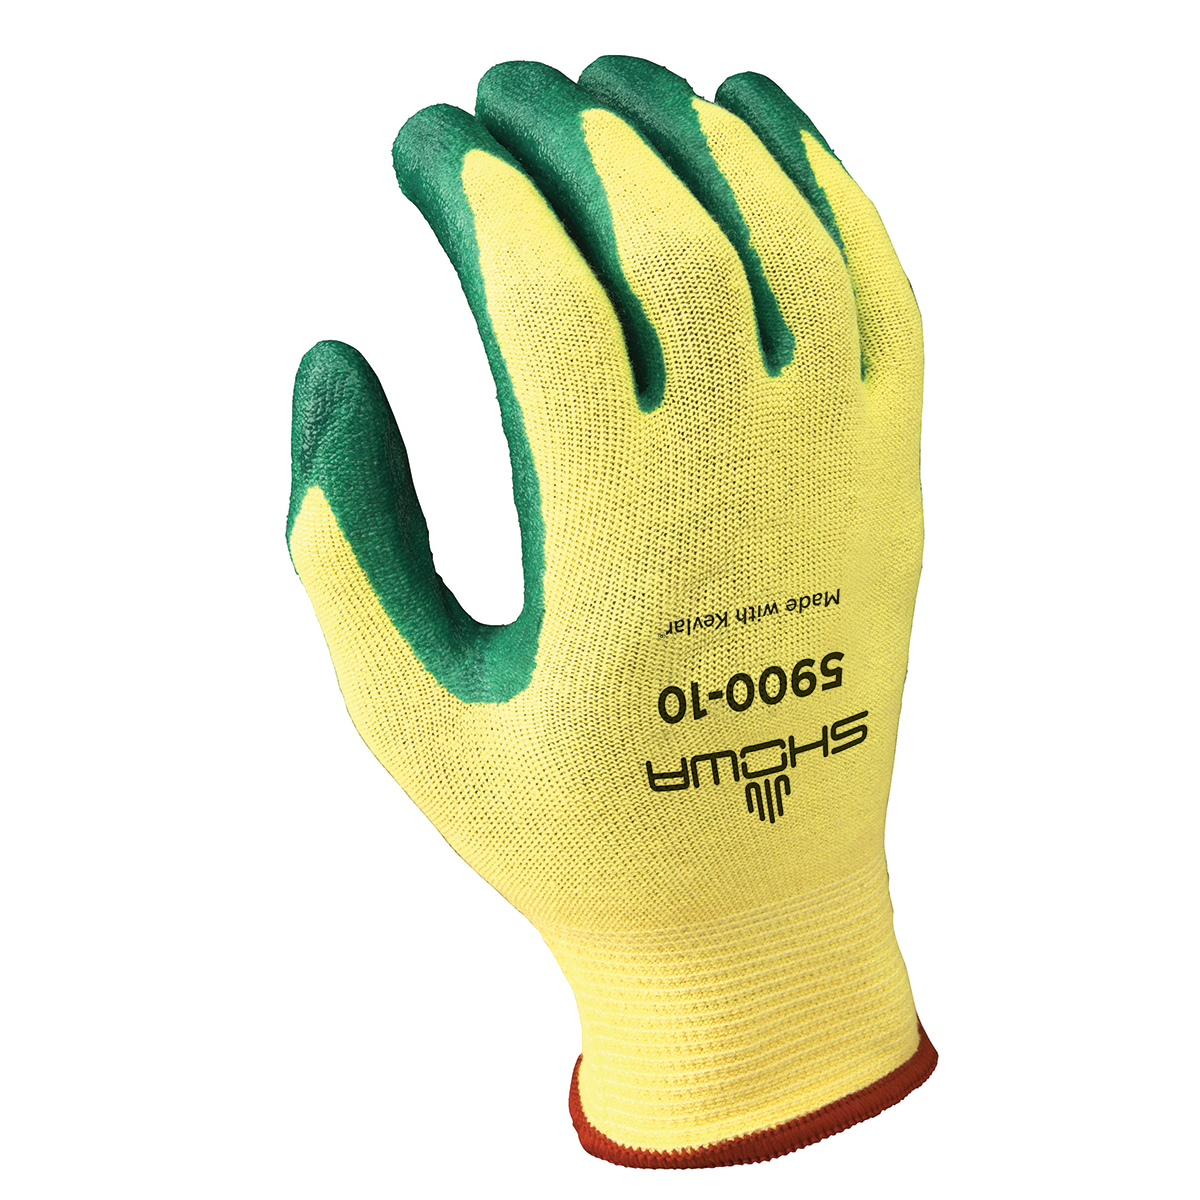 Cut resistant, nitrile-coated flat-dipped, yellow/green dip, seamless, cut-resistant, Kevlar®-Lycra® shell, small ANSI CUT LEVEL A3 - Cut Resistant